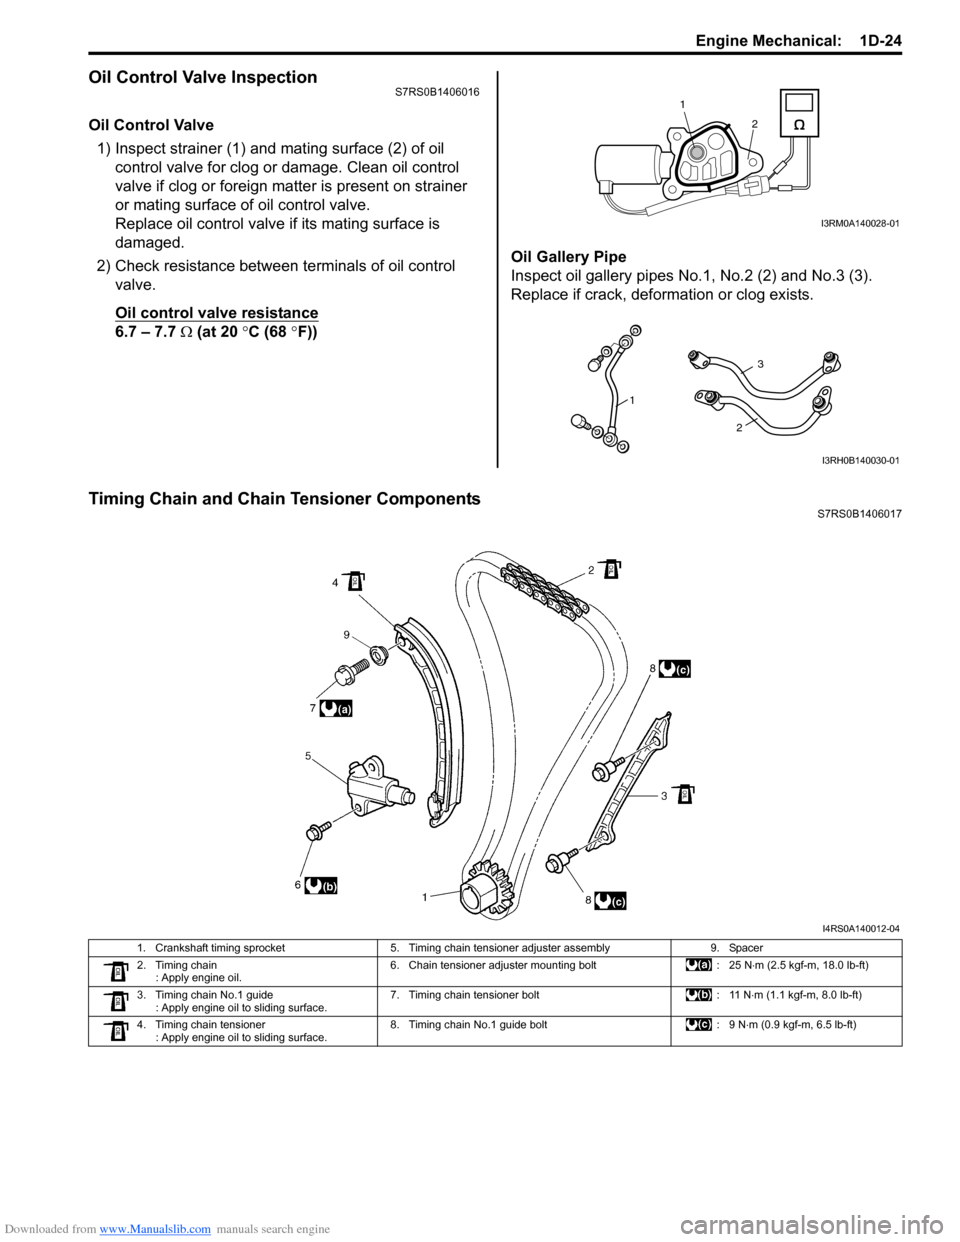 SUZUKI SWIFT 2006 2.G Service Service Manual Downloaded from www.Manualslib.com manuals search engine Engine Mechanical:  1D-24
Oil Control Valve InspectionS7RS0B1406016
Oil Control Valve1) Inspect strainer (1) and mating surface (2) of oil  con